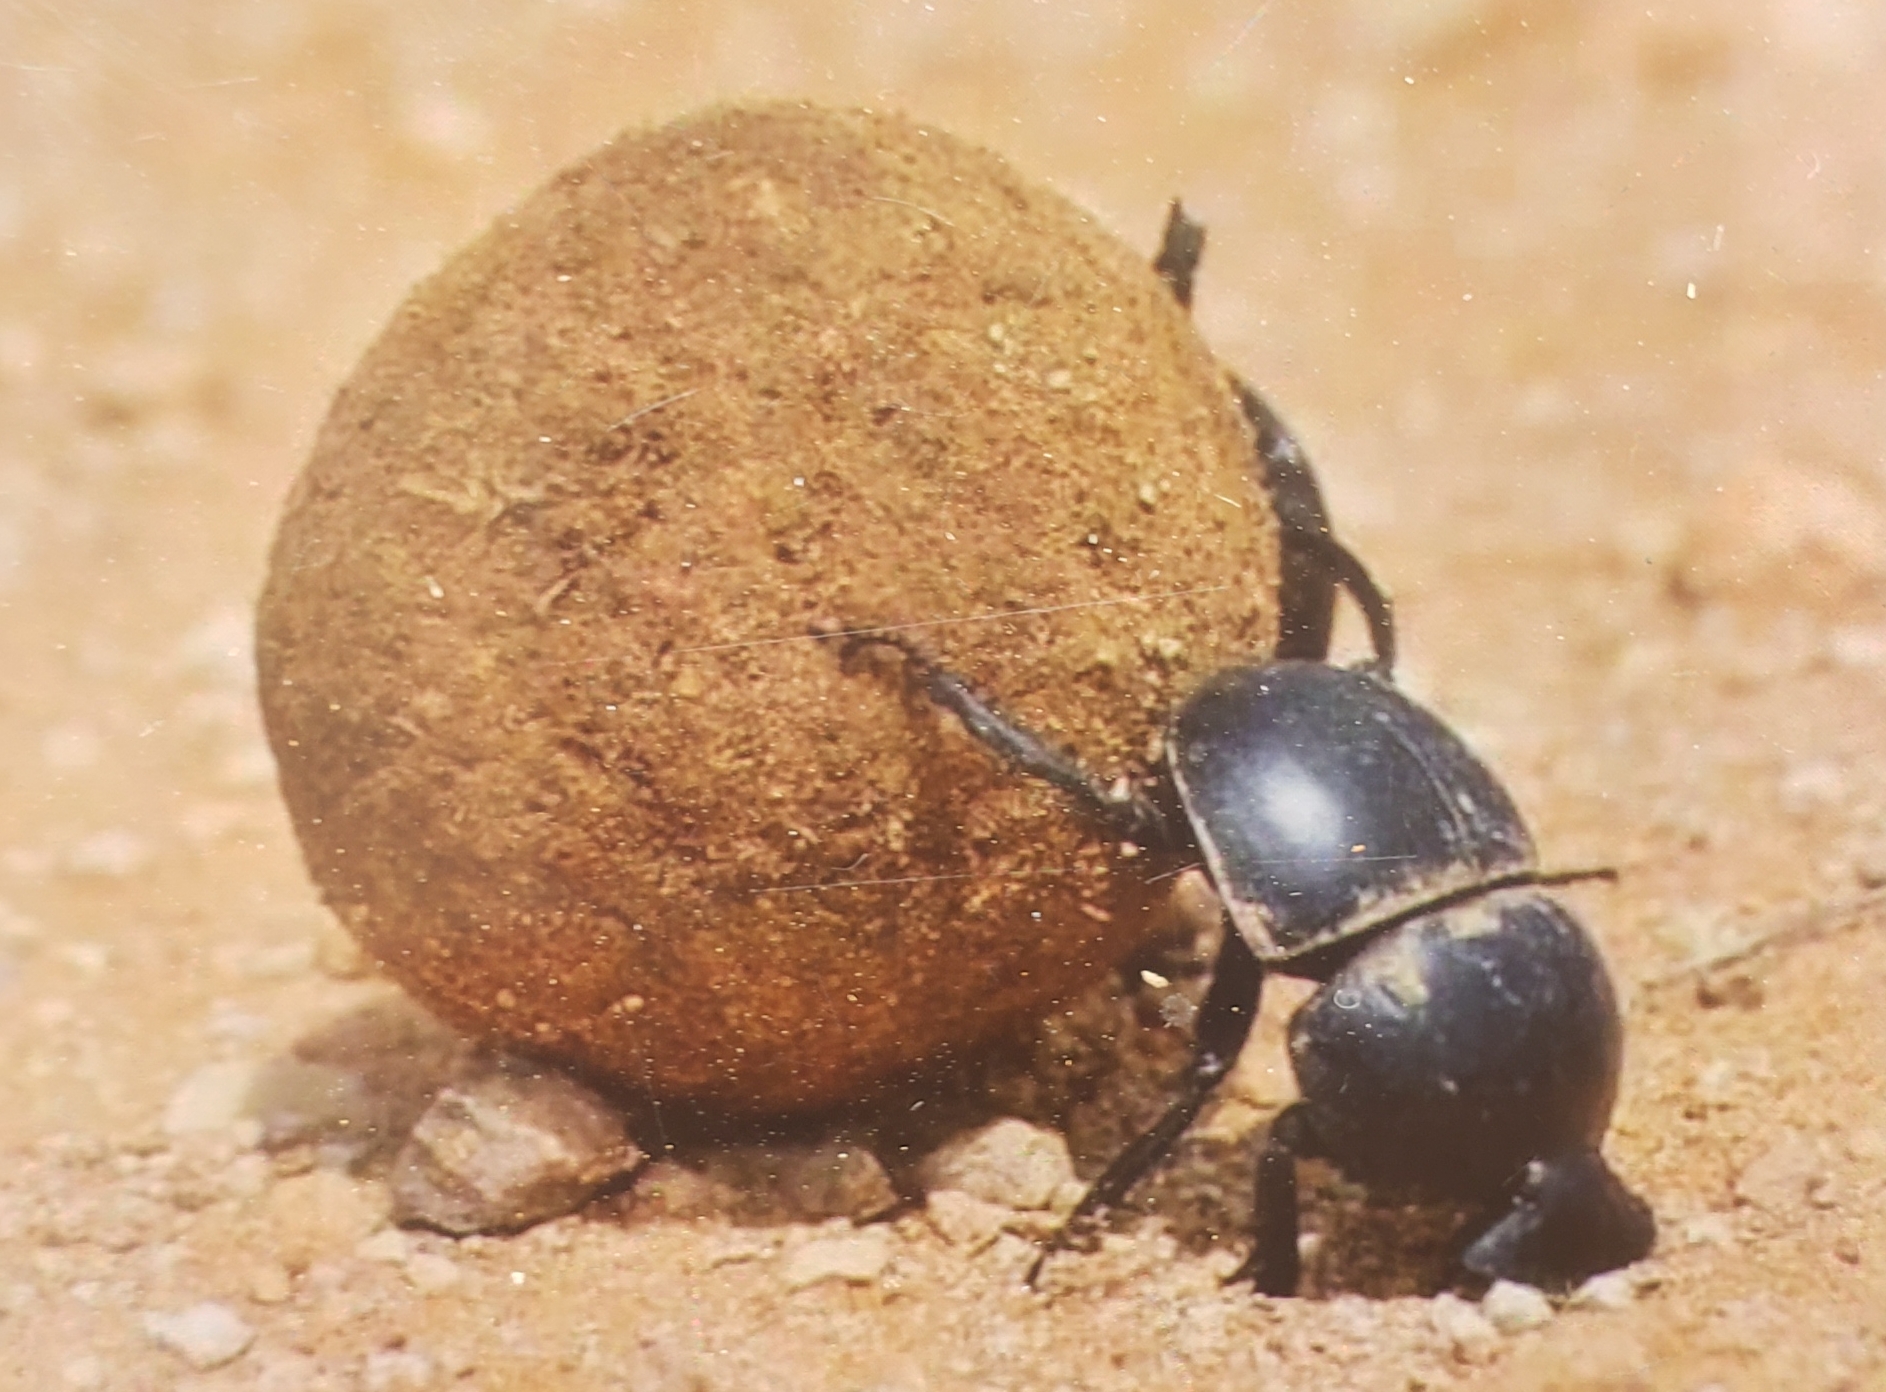 https://commons.wikimedia.org/wiki/File:Dung_beetle_1.jpg